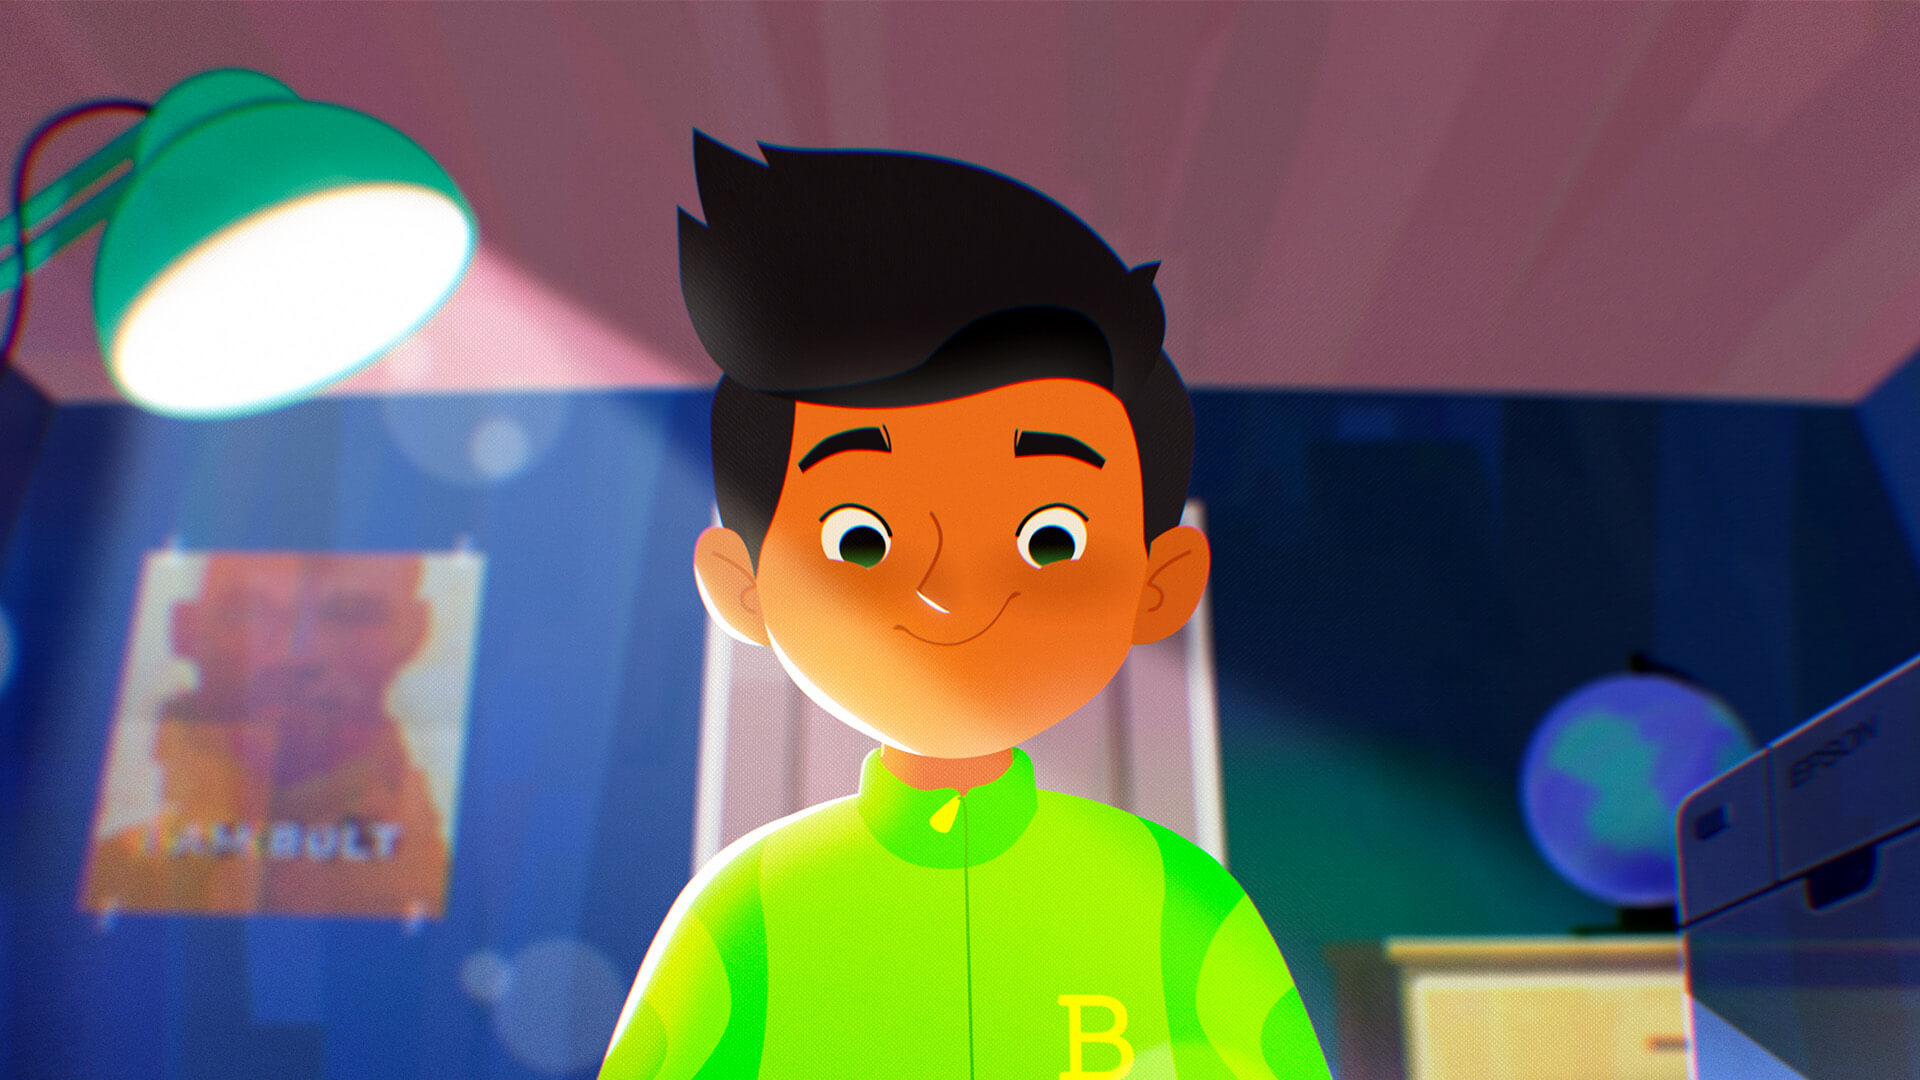 Animation of the boy working at his desk